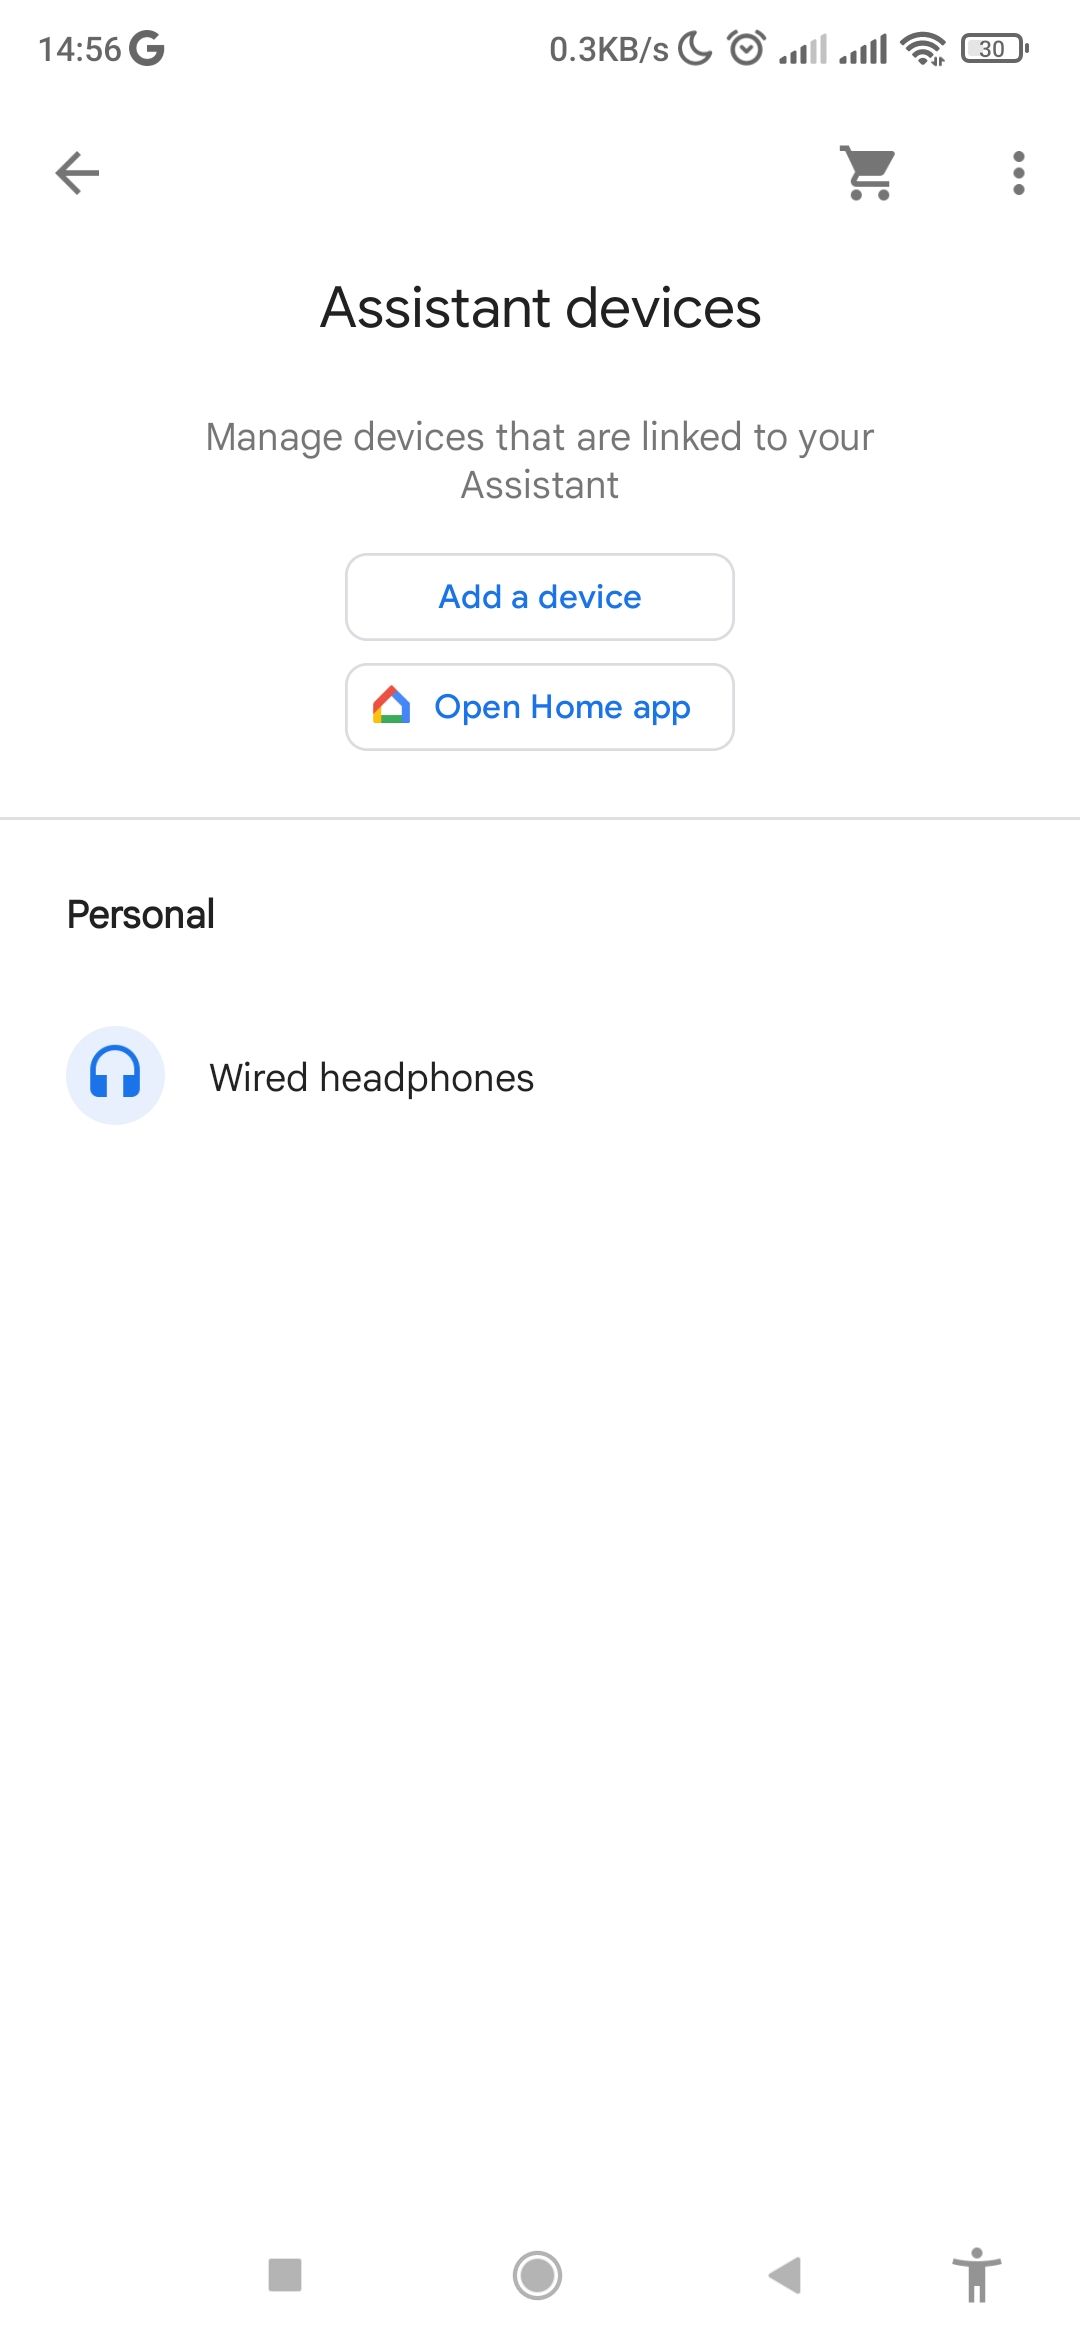 Google Assistant devices page on Android